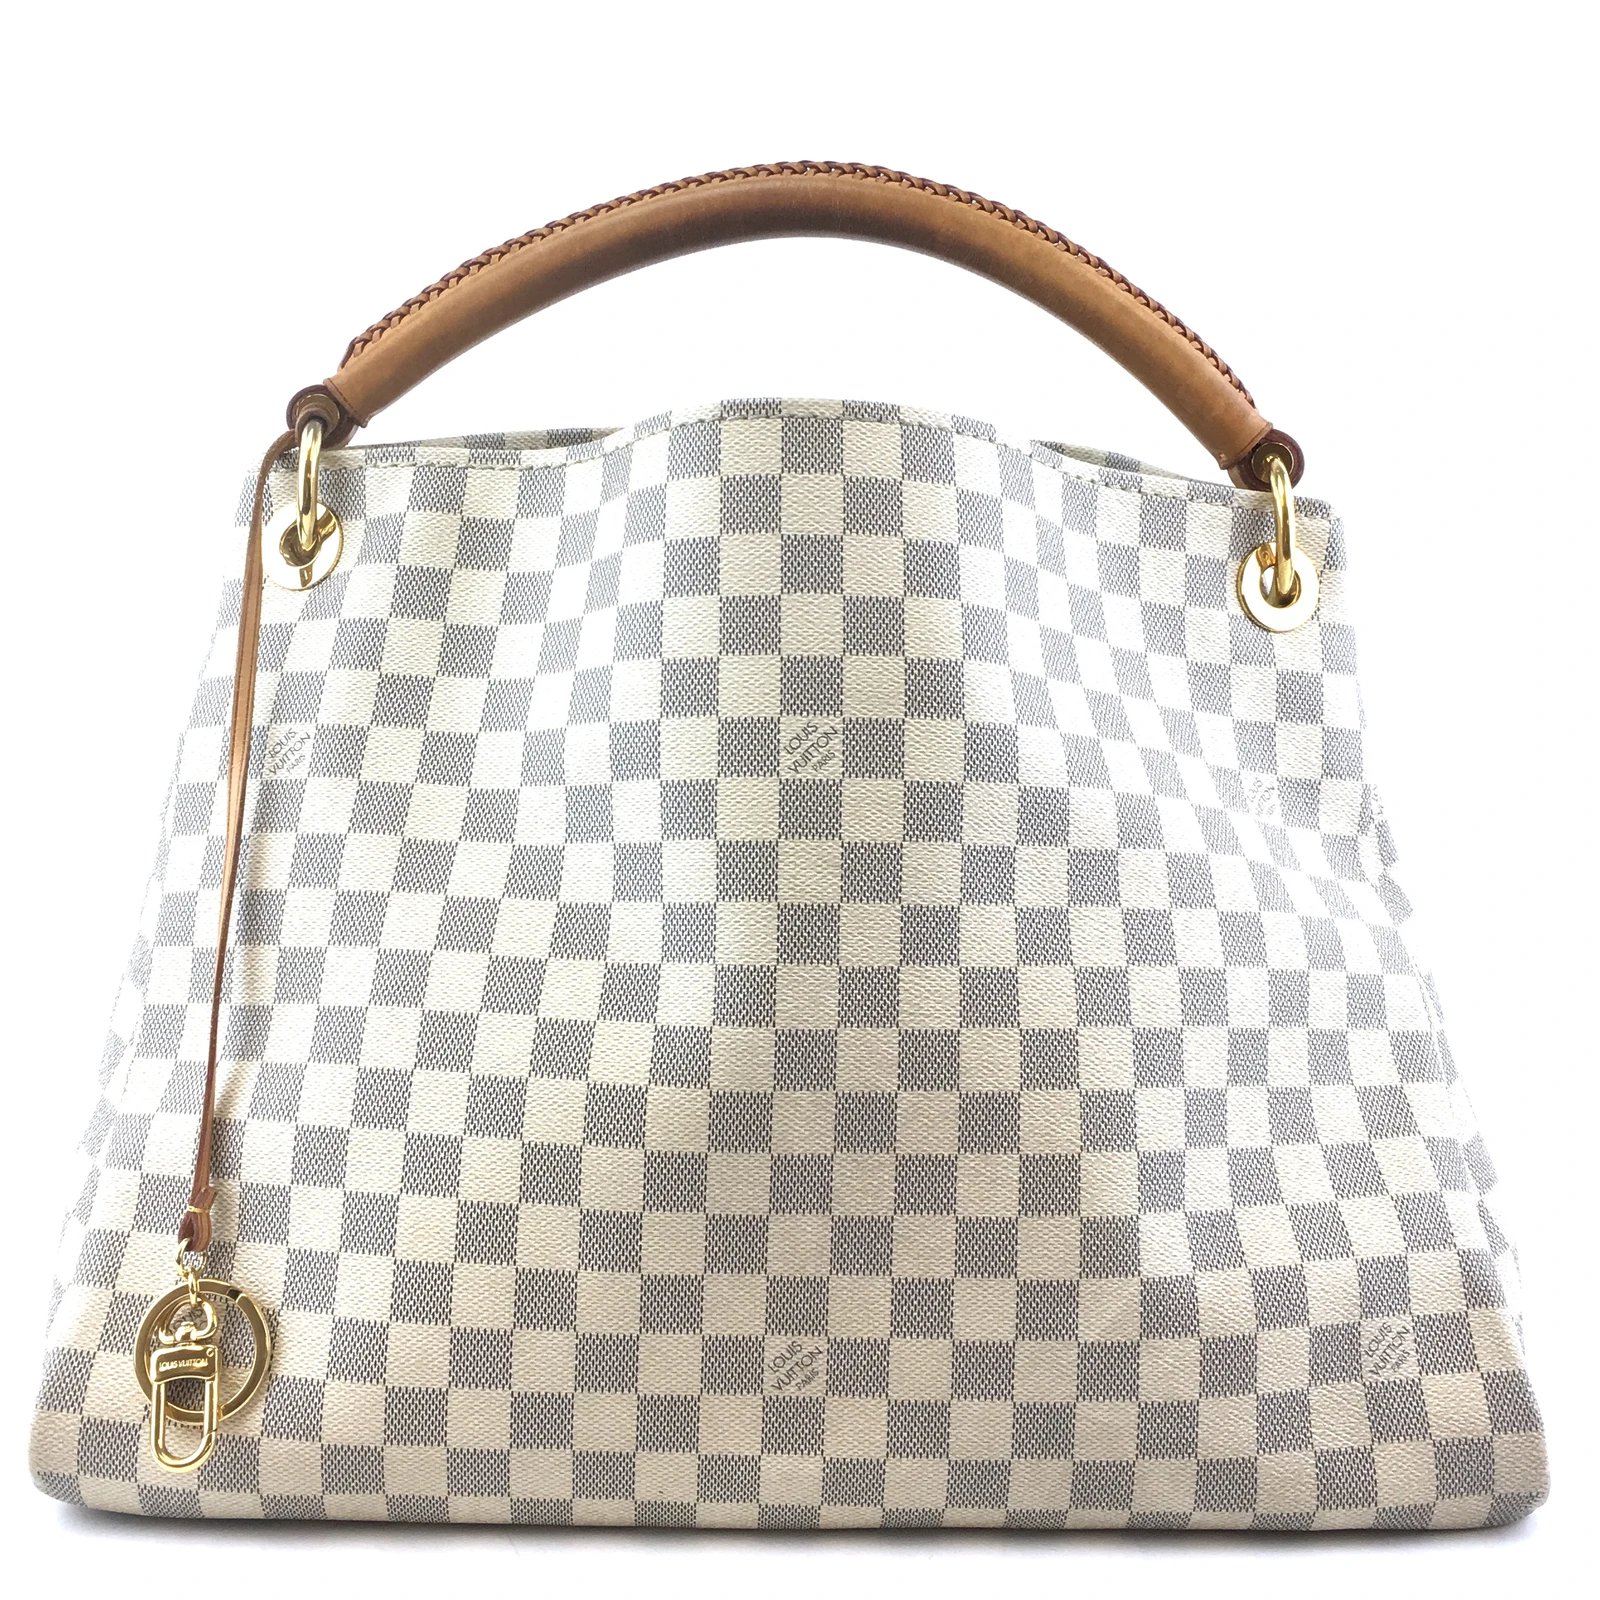 Louis Vuitton Damier Azur Artsy MM This will be my next LV